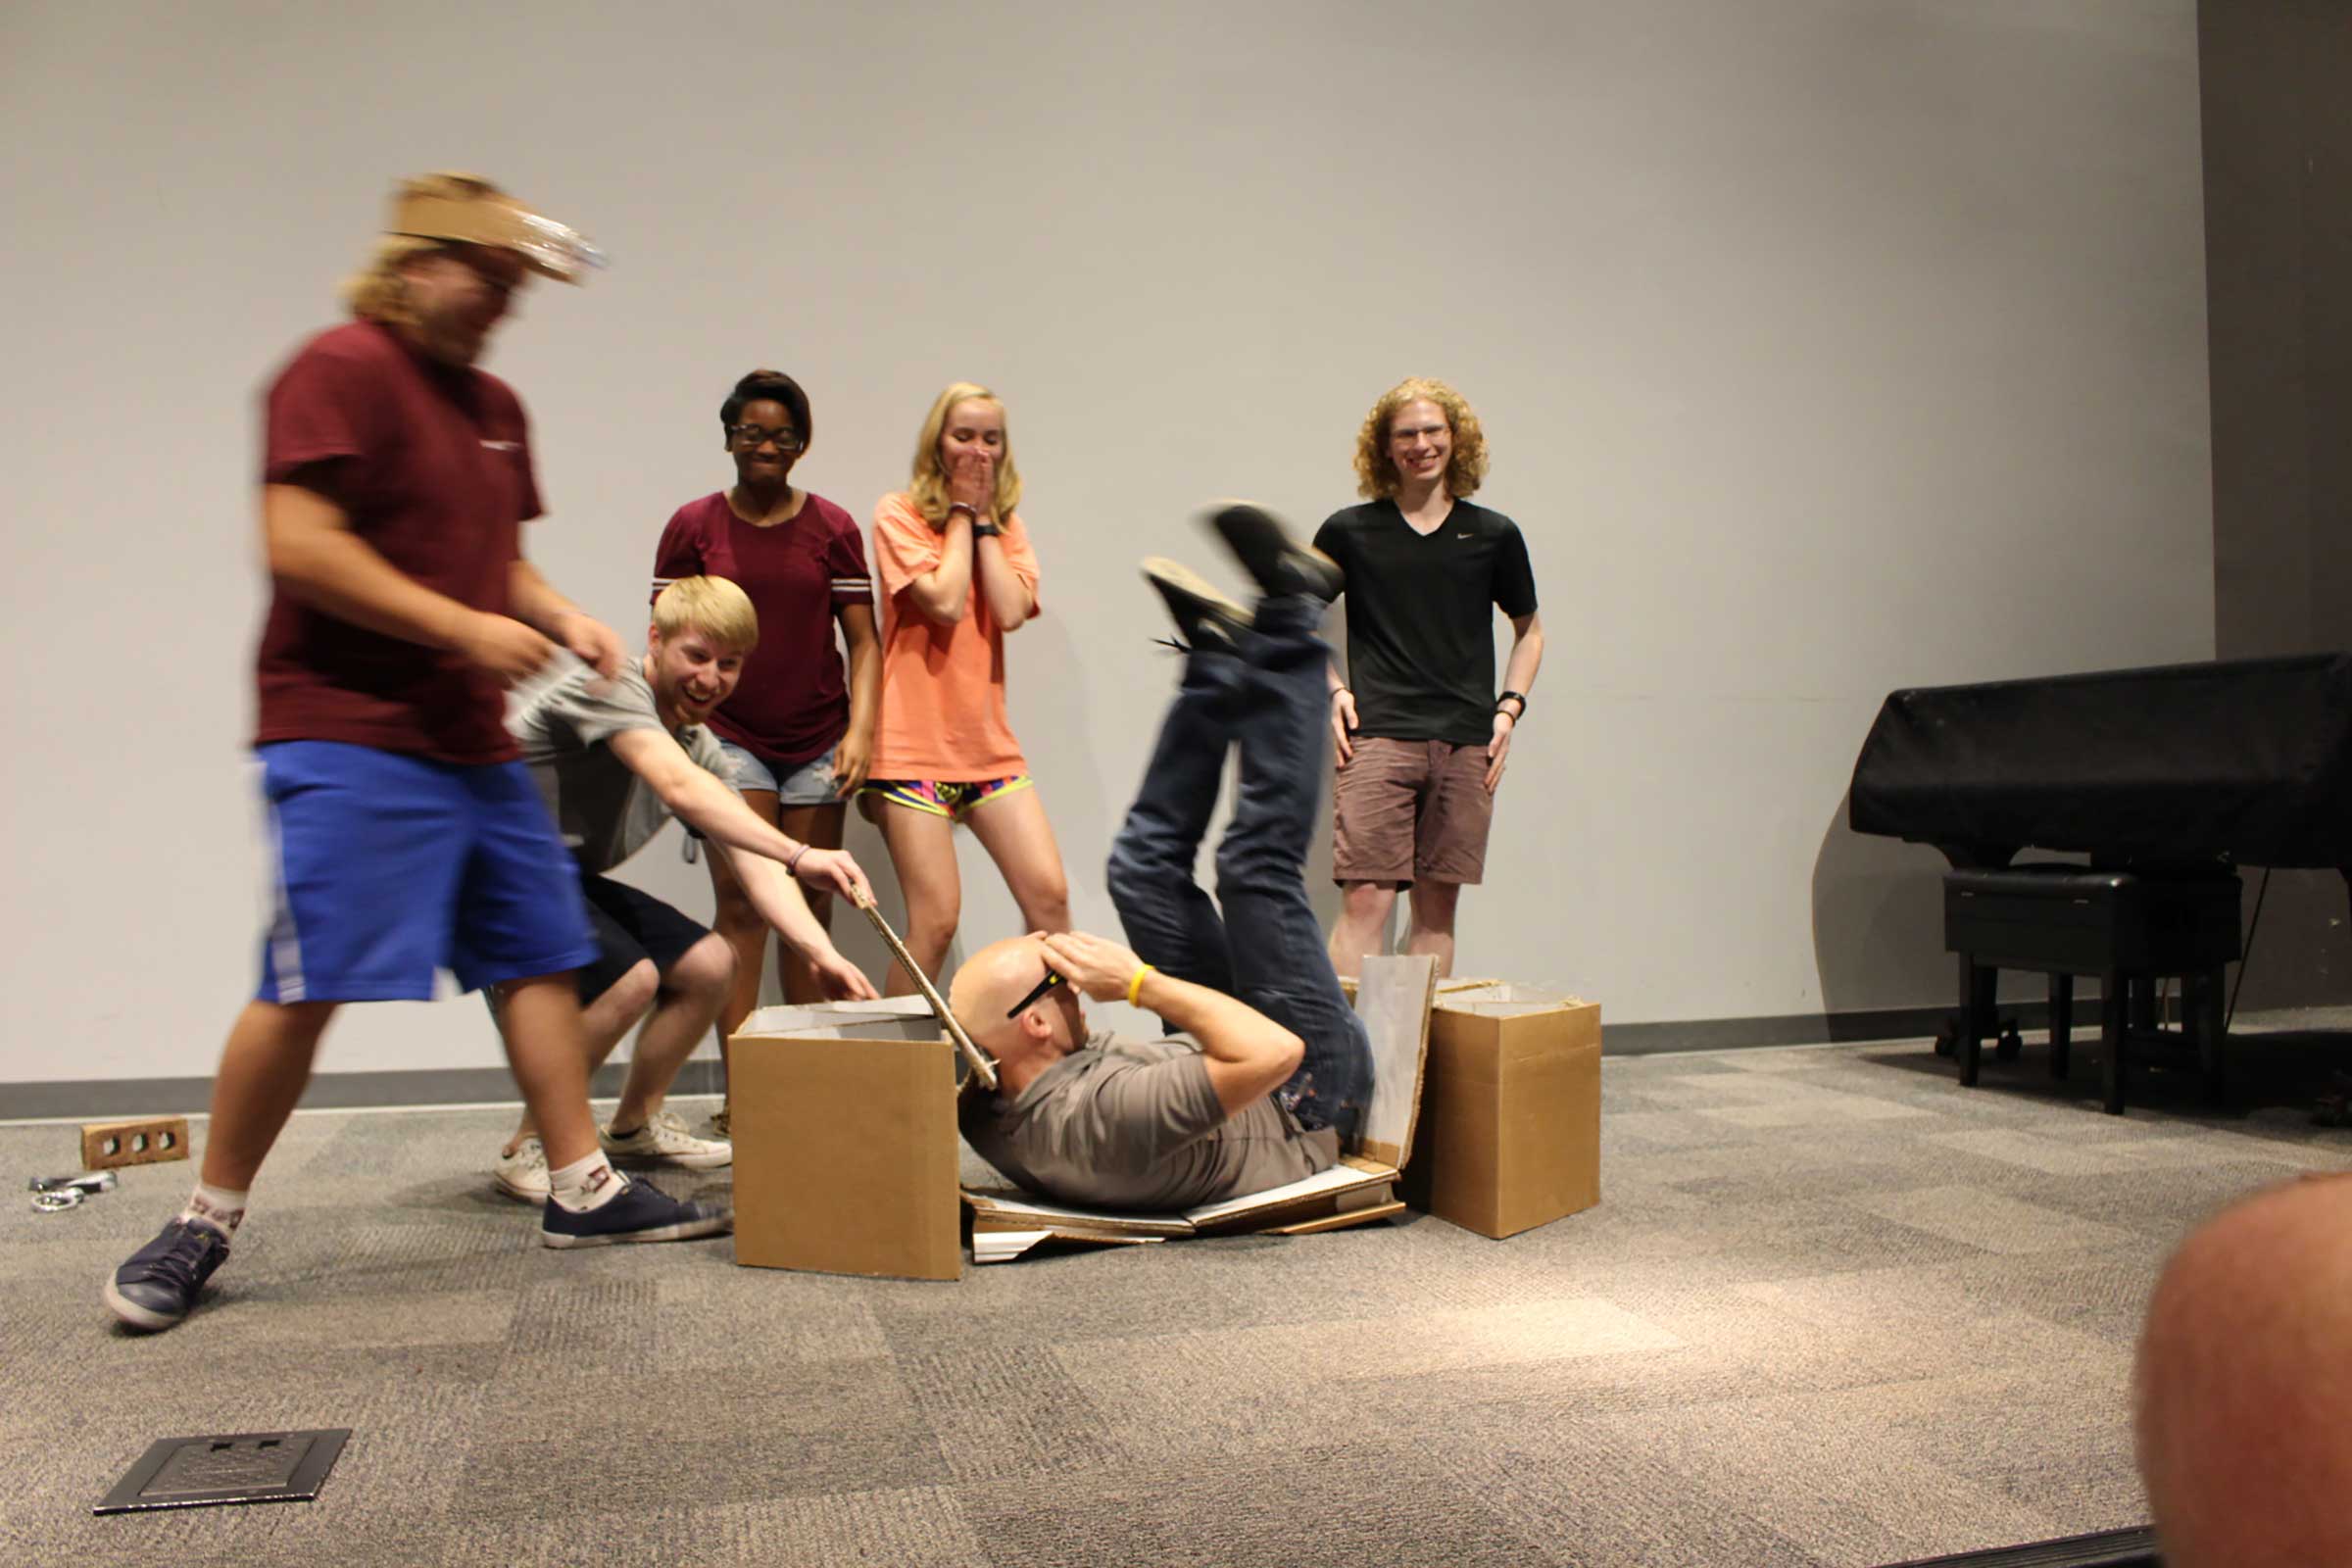 Day 4: Cardboard Sitting Device – Review 14